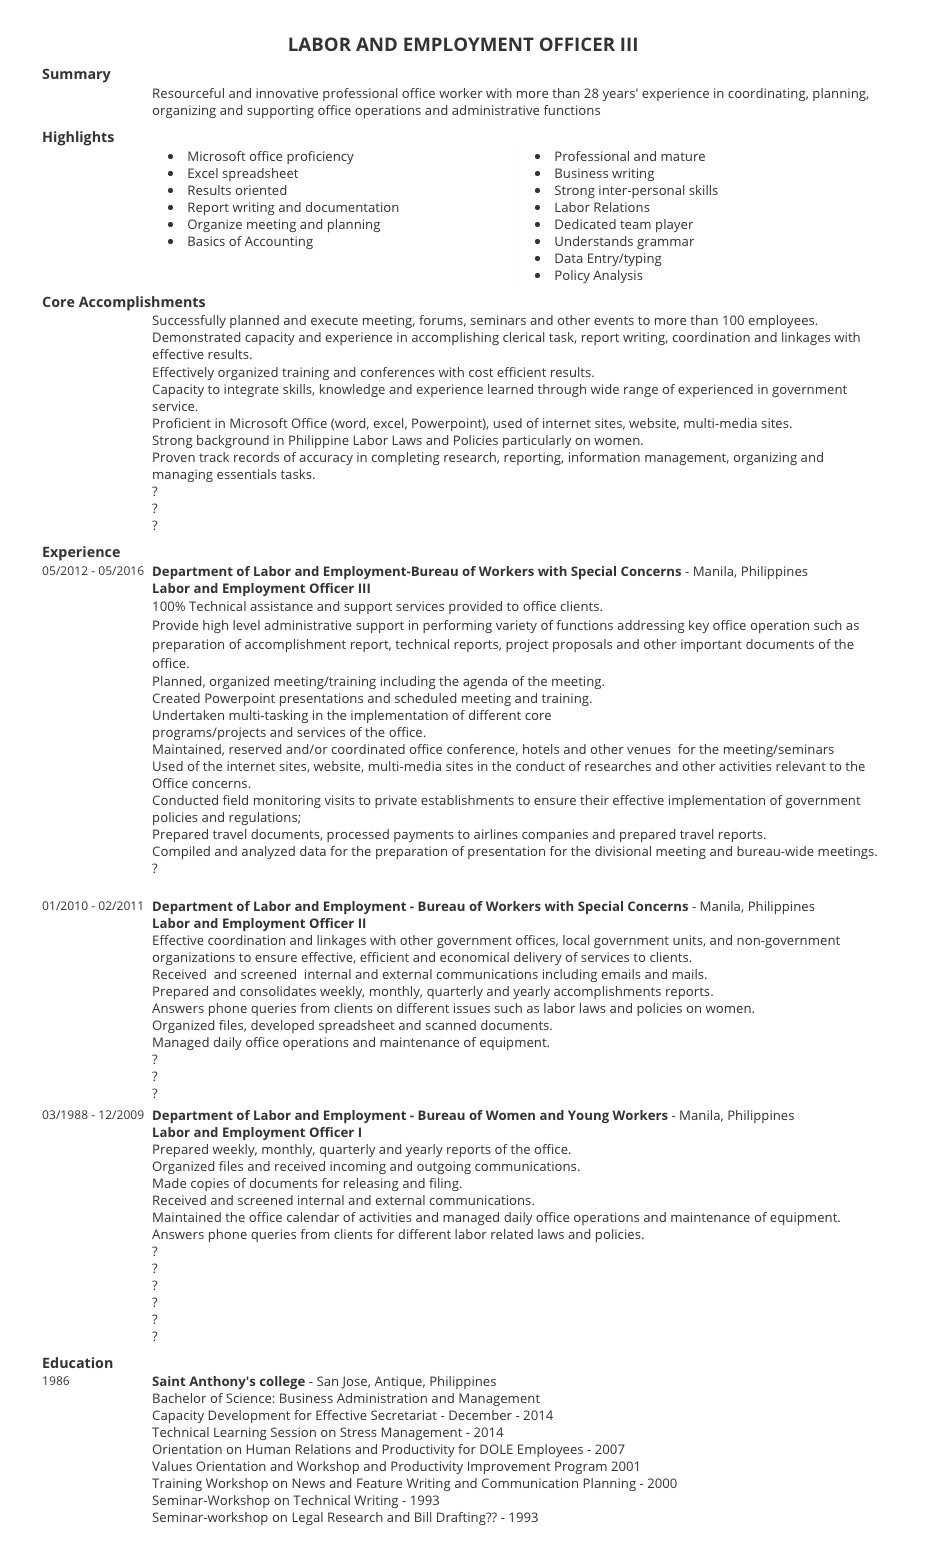 Samples Of Good Resumes for Government Jobs Resume Samples for Government Job Application In the Philippines …